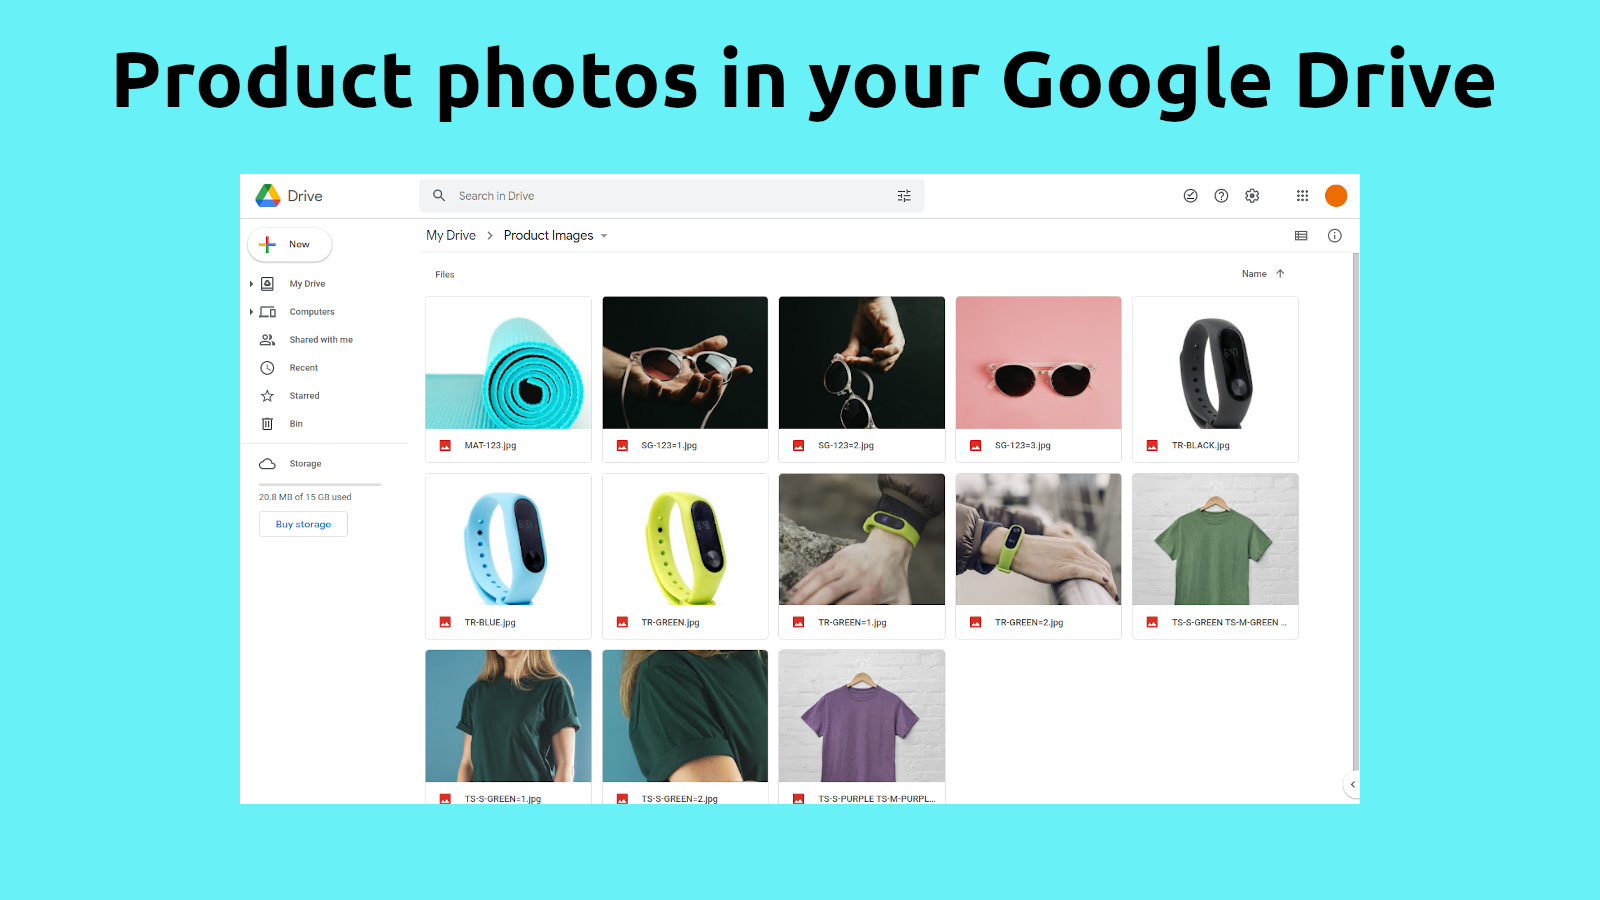 Product photos in your Google Drive